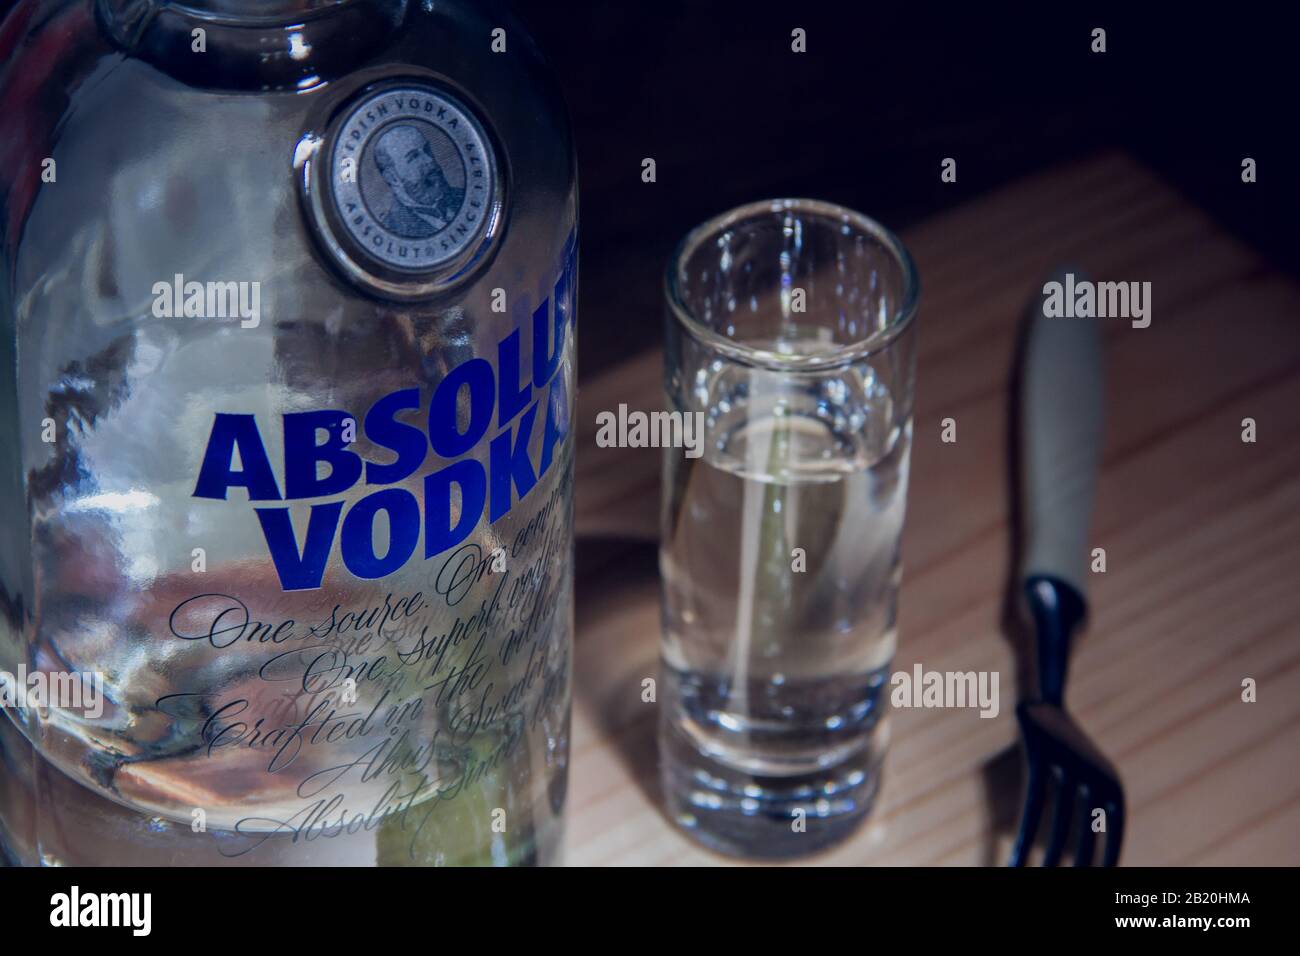 Izhevsk, Russia January 6, 2020: Bottle of Absolut vodka, a glass and a pickle appetizer Stock Photo